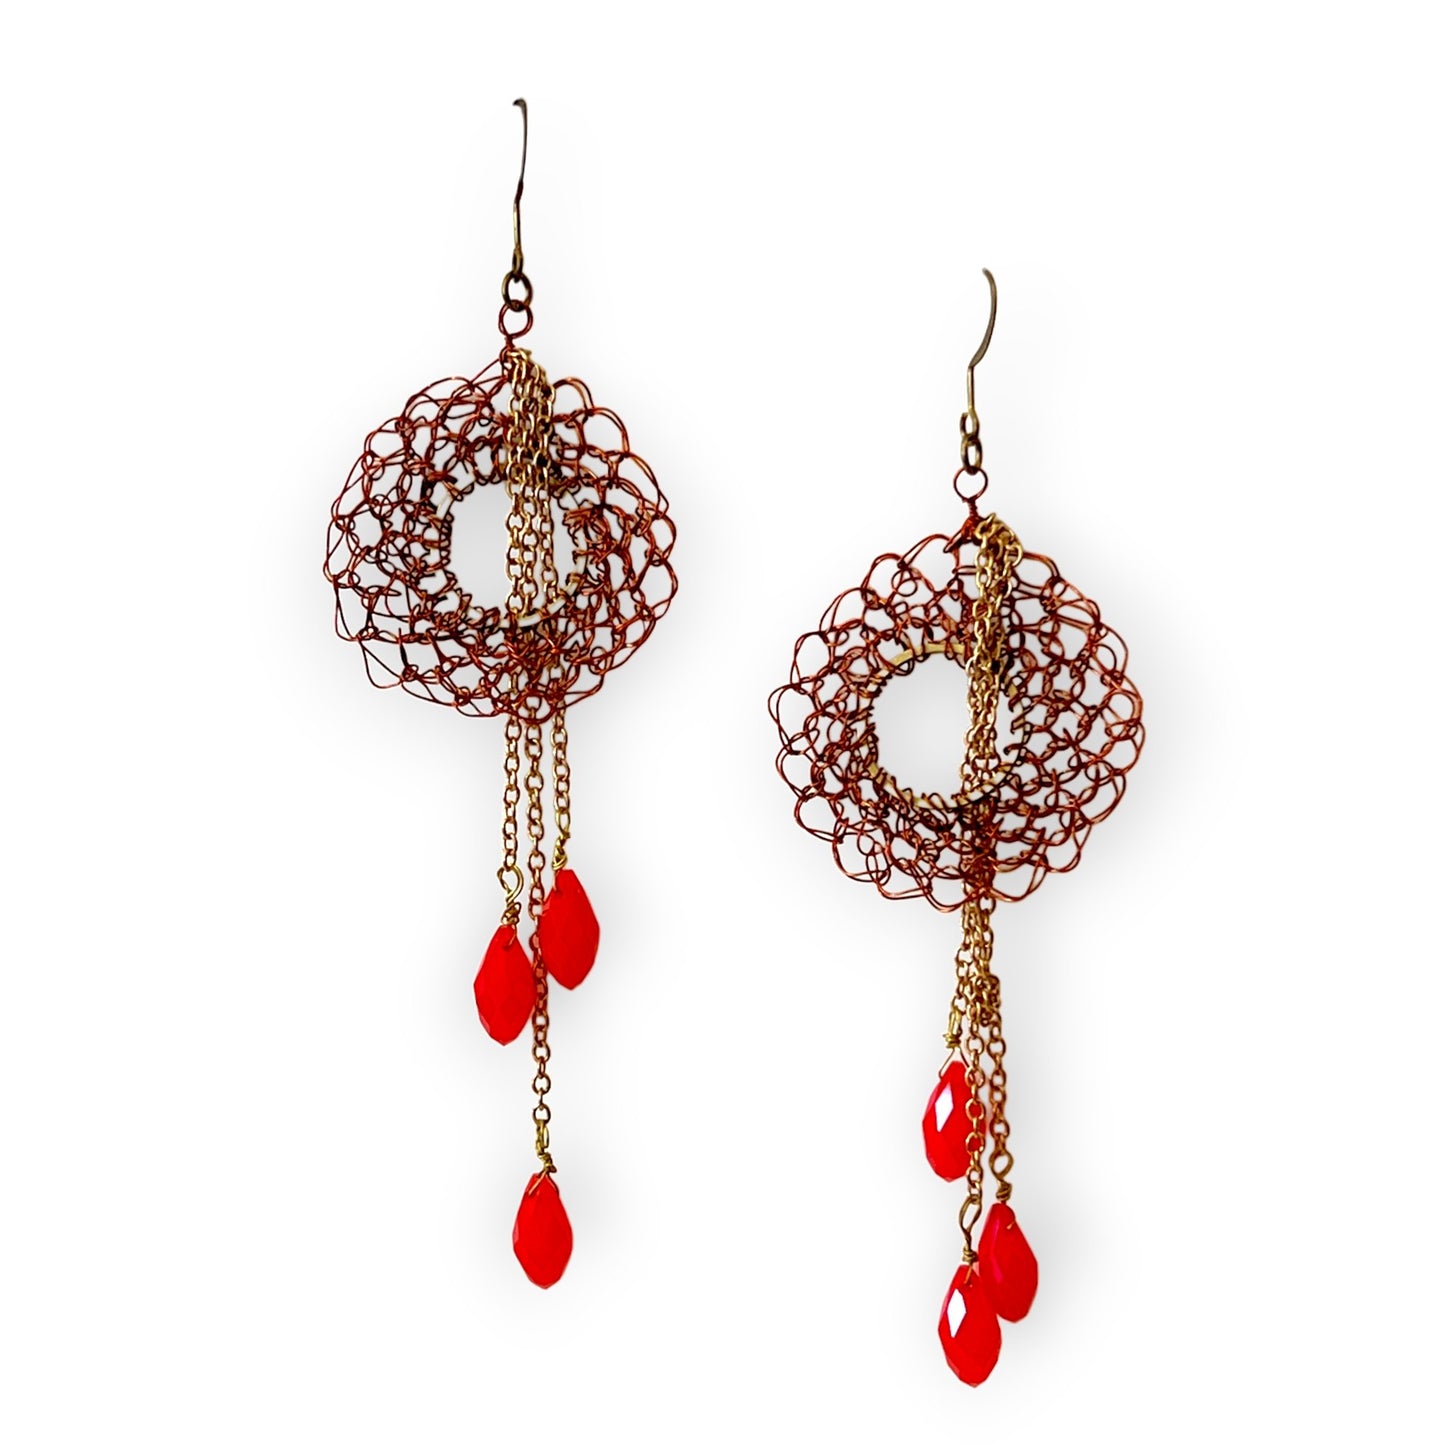 Drop earring with colorful woven ring with suspended crystals - Sundara Joon